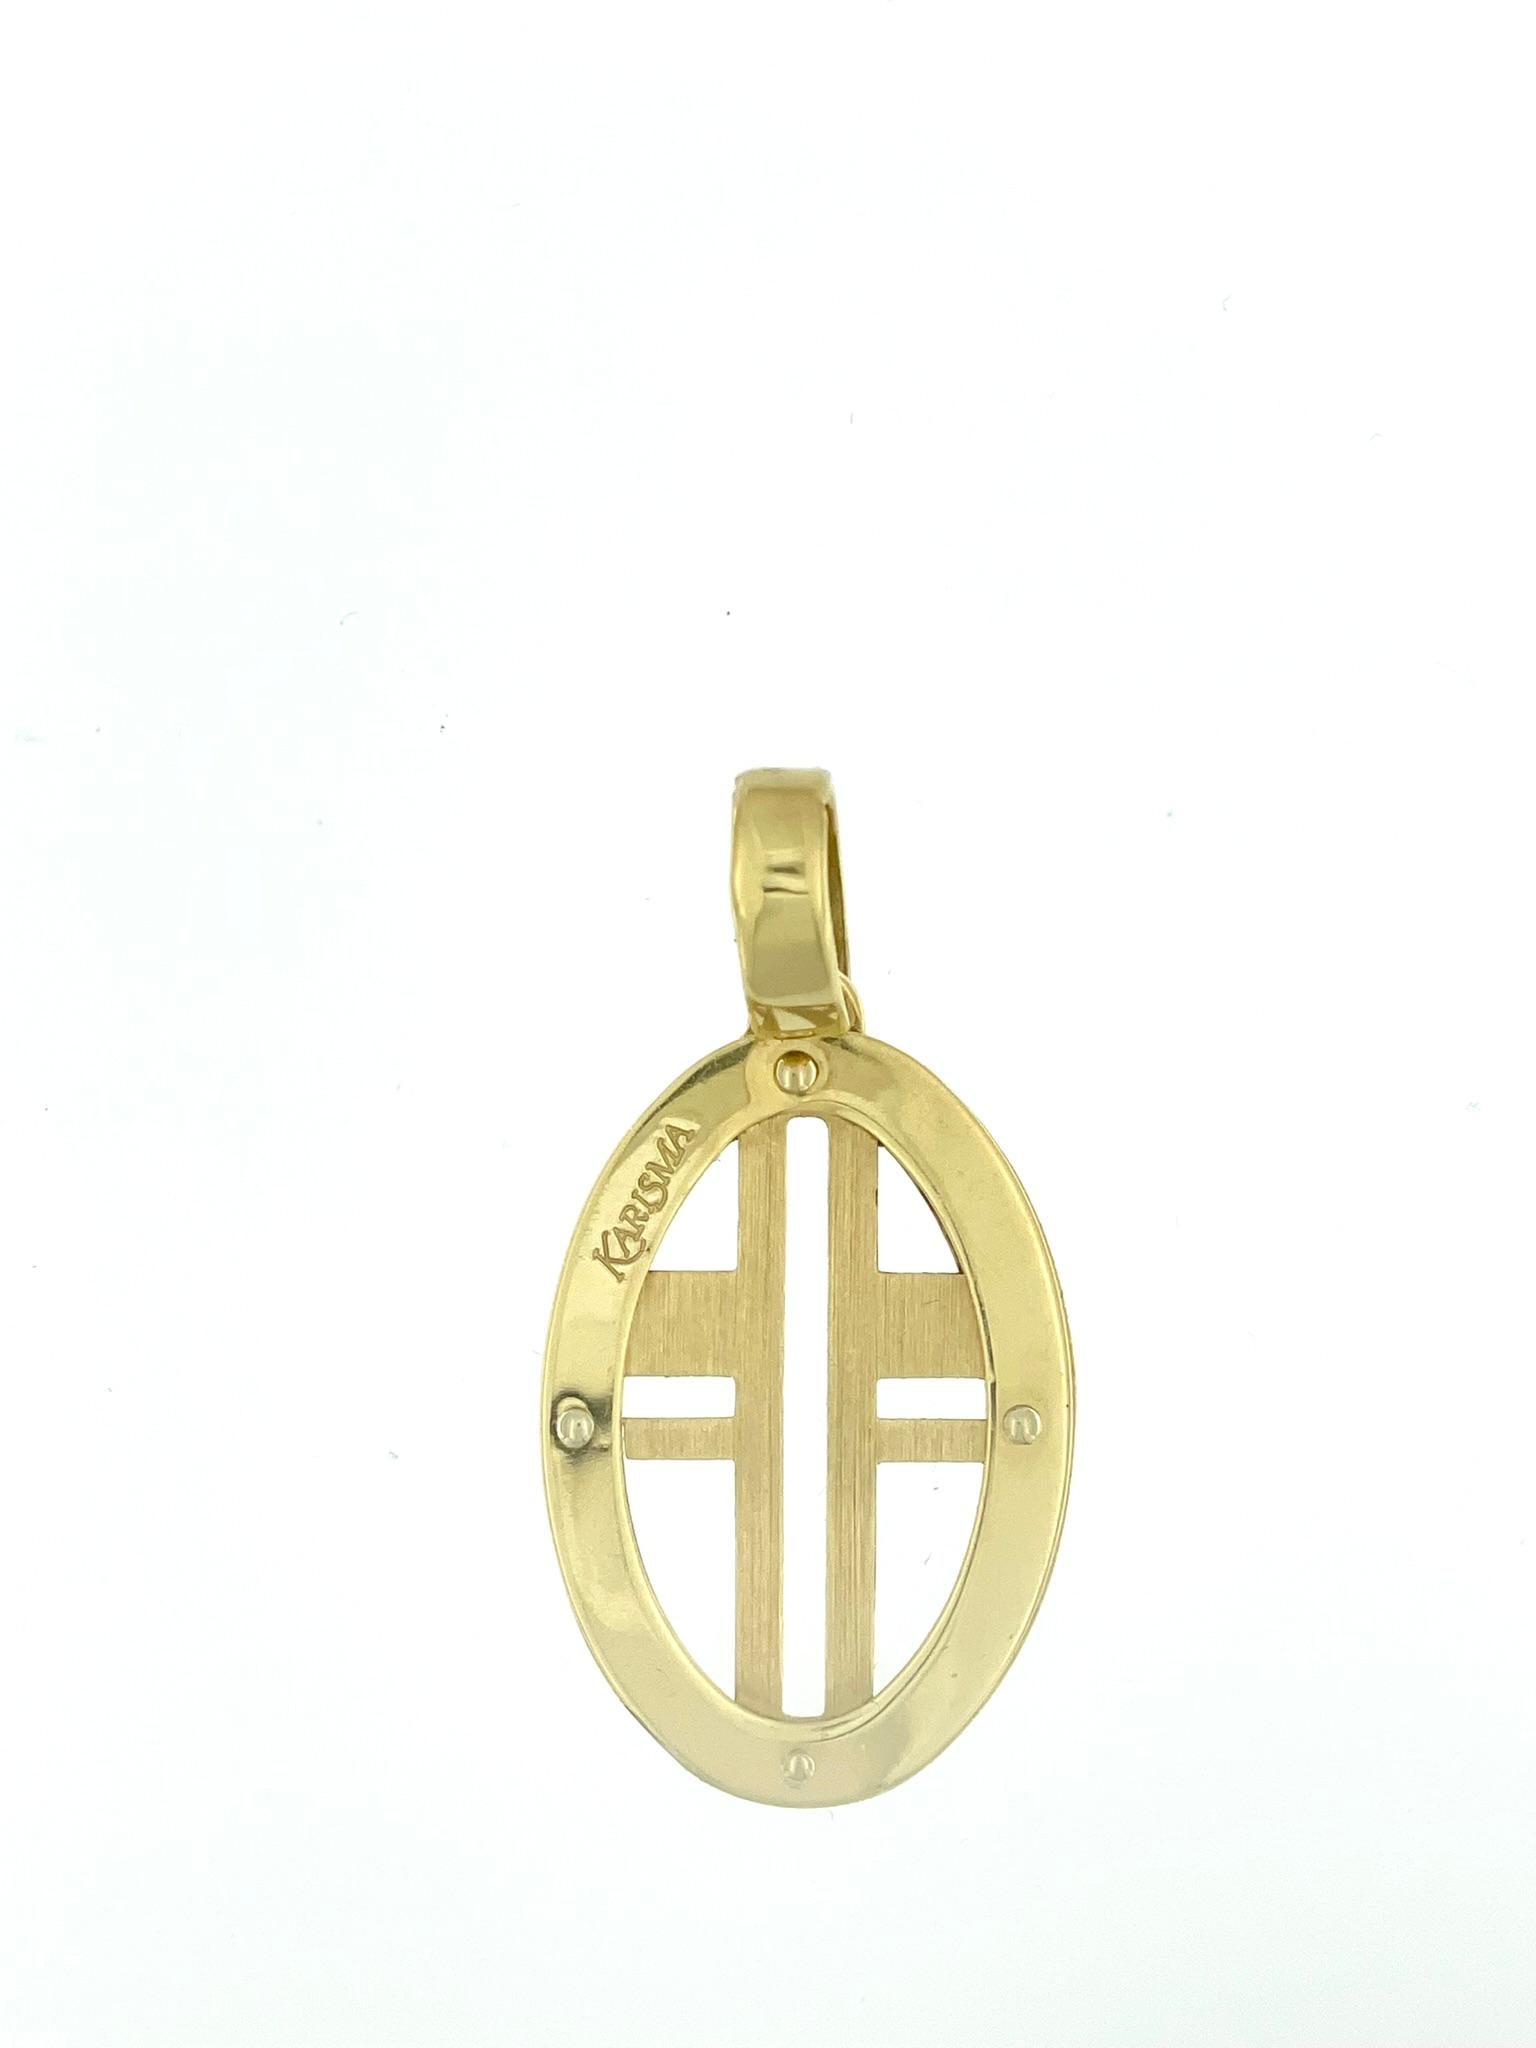 The Modern Italian 18-karat Yellow Gold Cross by Karisma is a contemporary and stylish piece of jewelry that combines fine craftsmanship with a sleek design. The cross is ingeniously incorporated into the pendant, creating a distinctive and modern